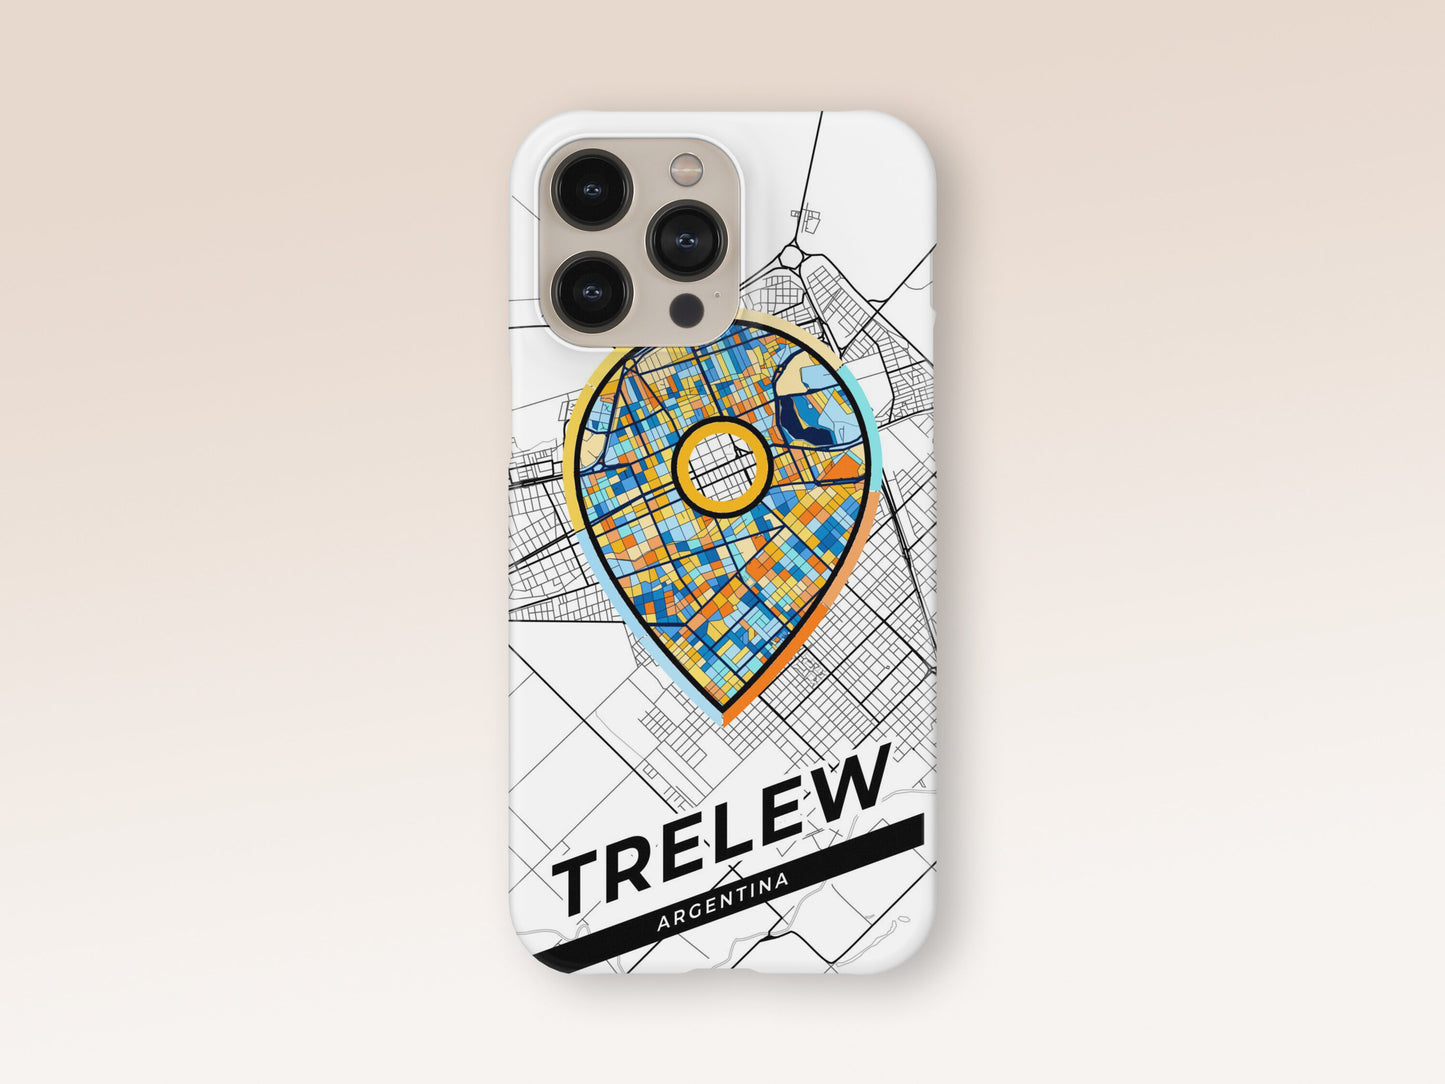 Trelew Argentina slim phone case with colorful icon. Birthday, wedding or housewarming gift. Couple match cases. 1